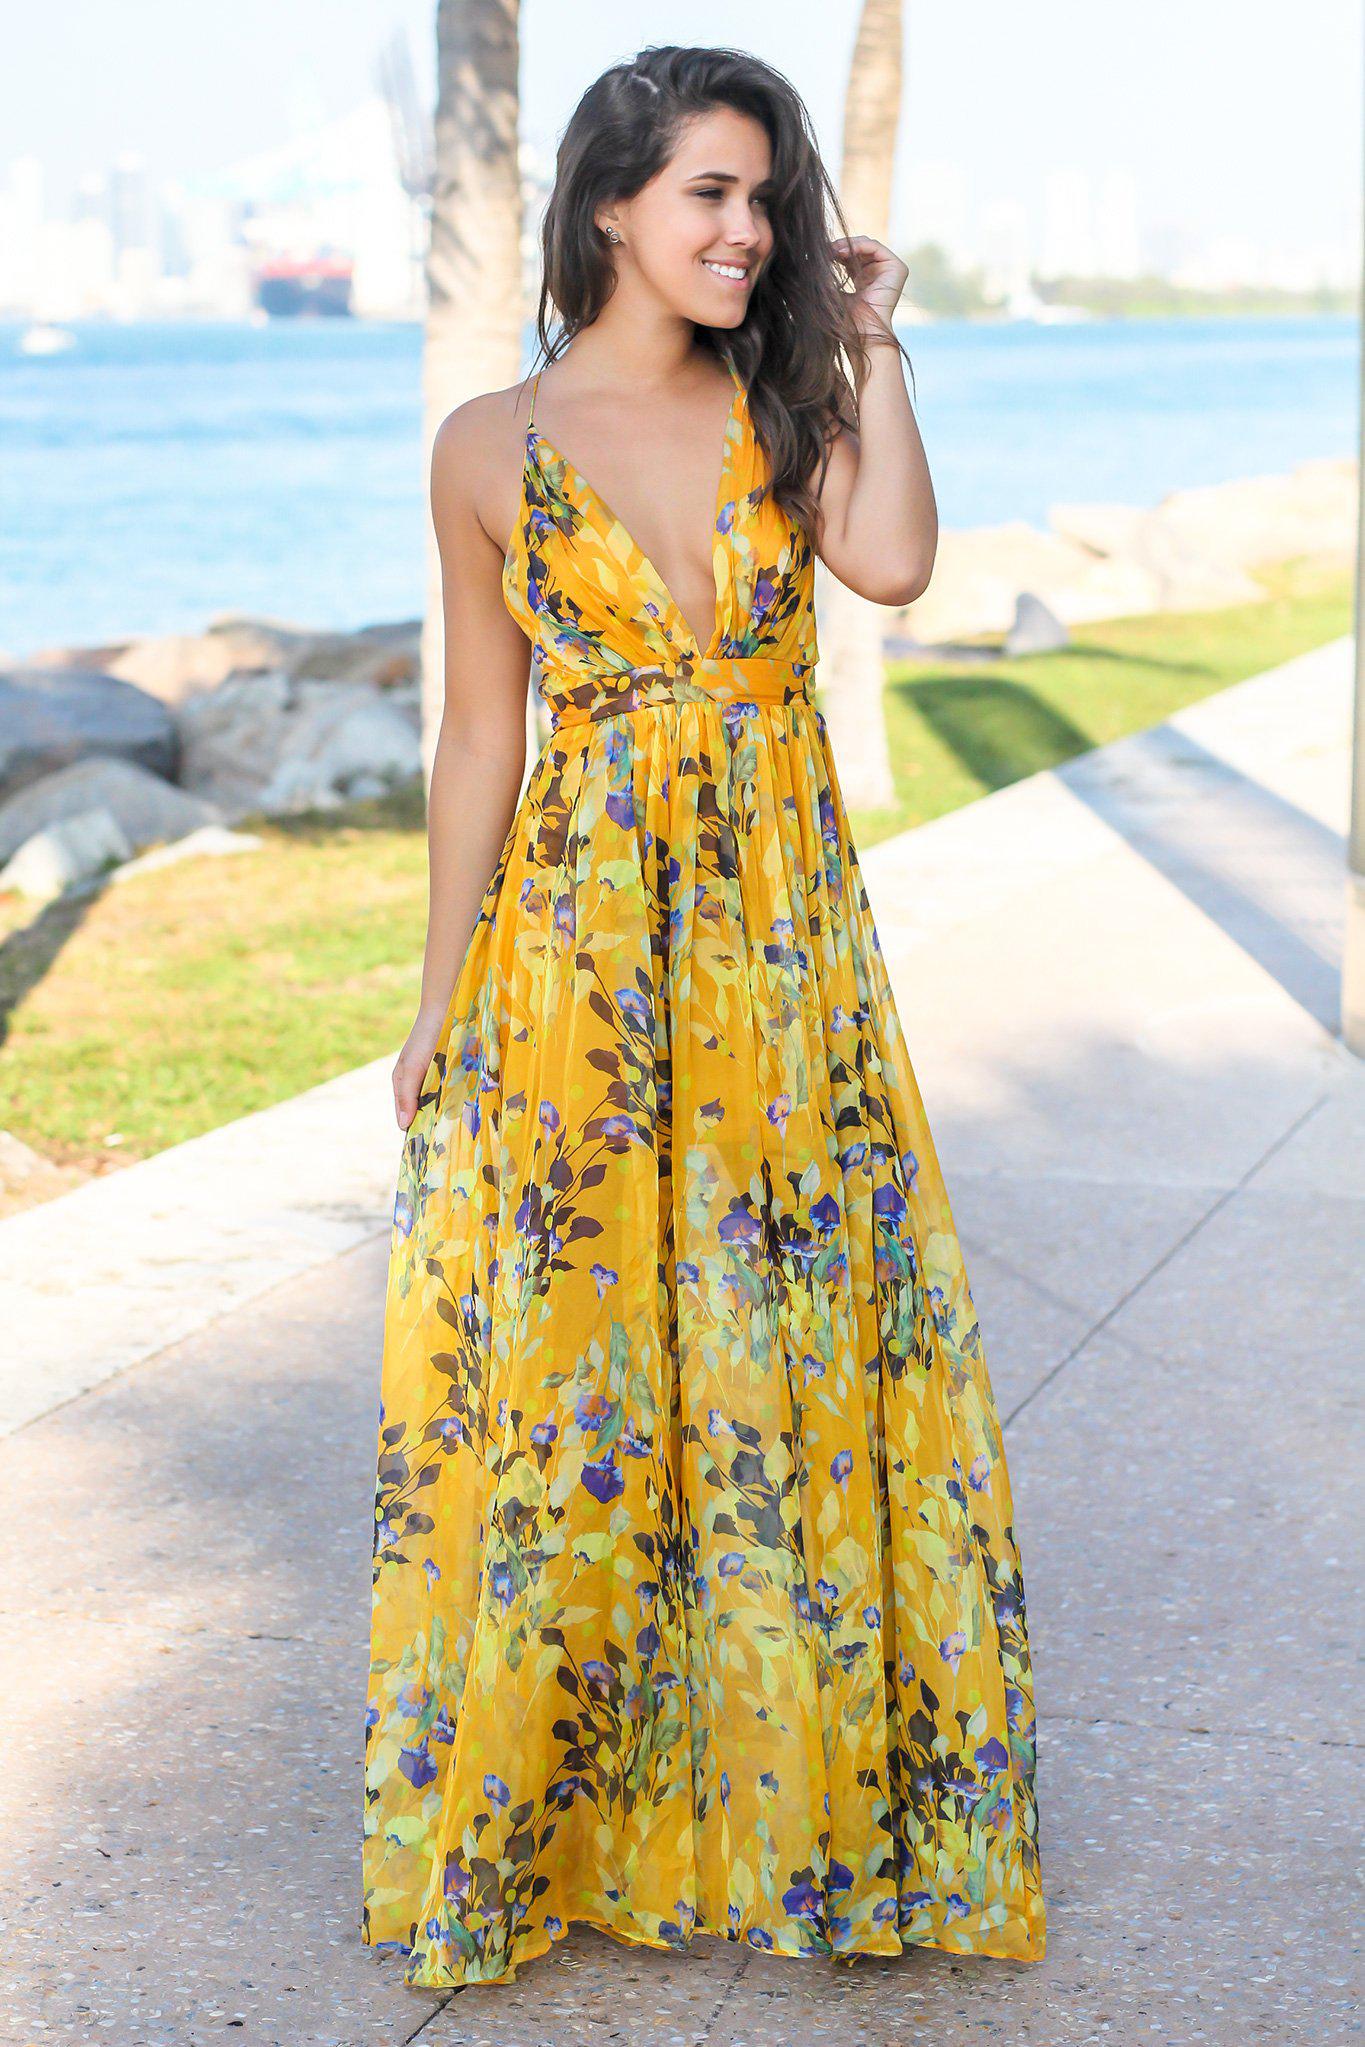 Black Dress With Yellow Flowers / Pippa Middleton's Floral Dress ...